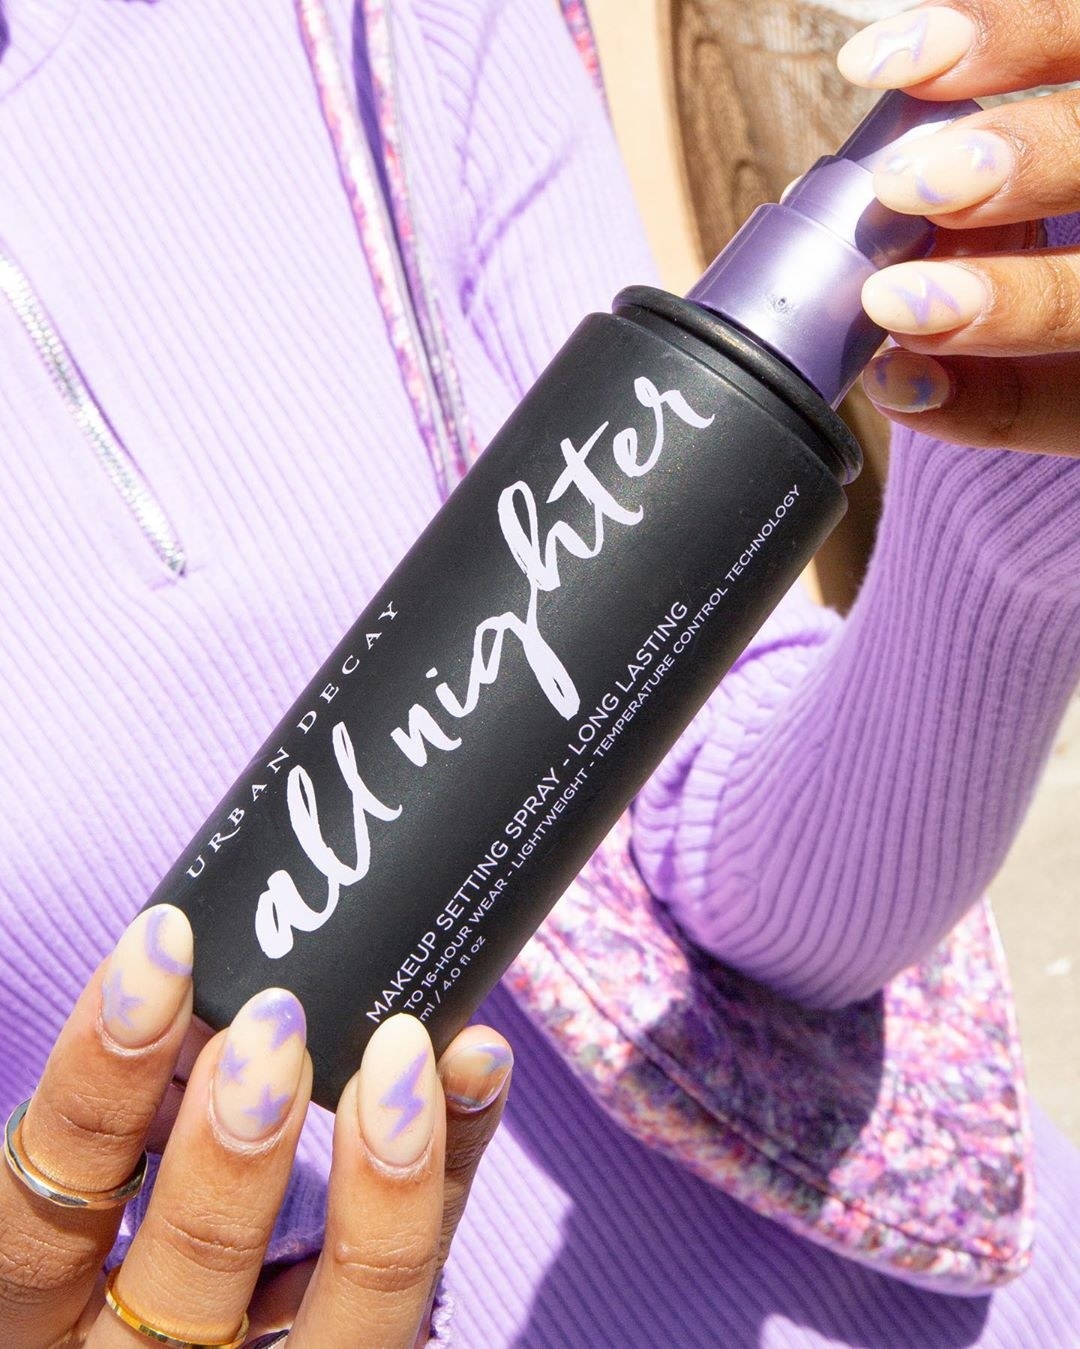 A model holds the Urban Decay All Nighter long-lasting setting spray in their hands